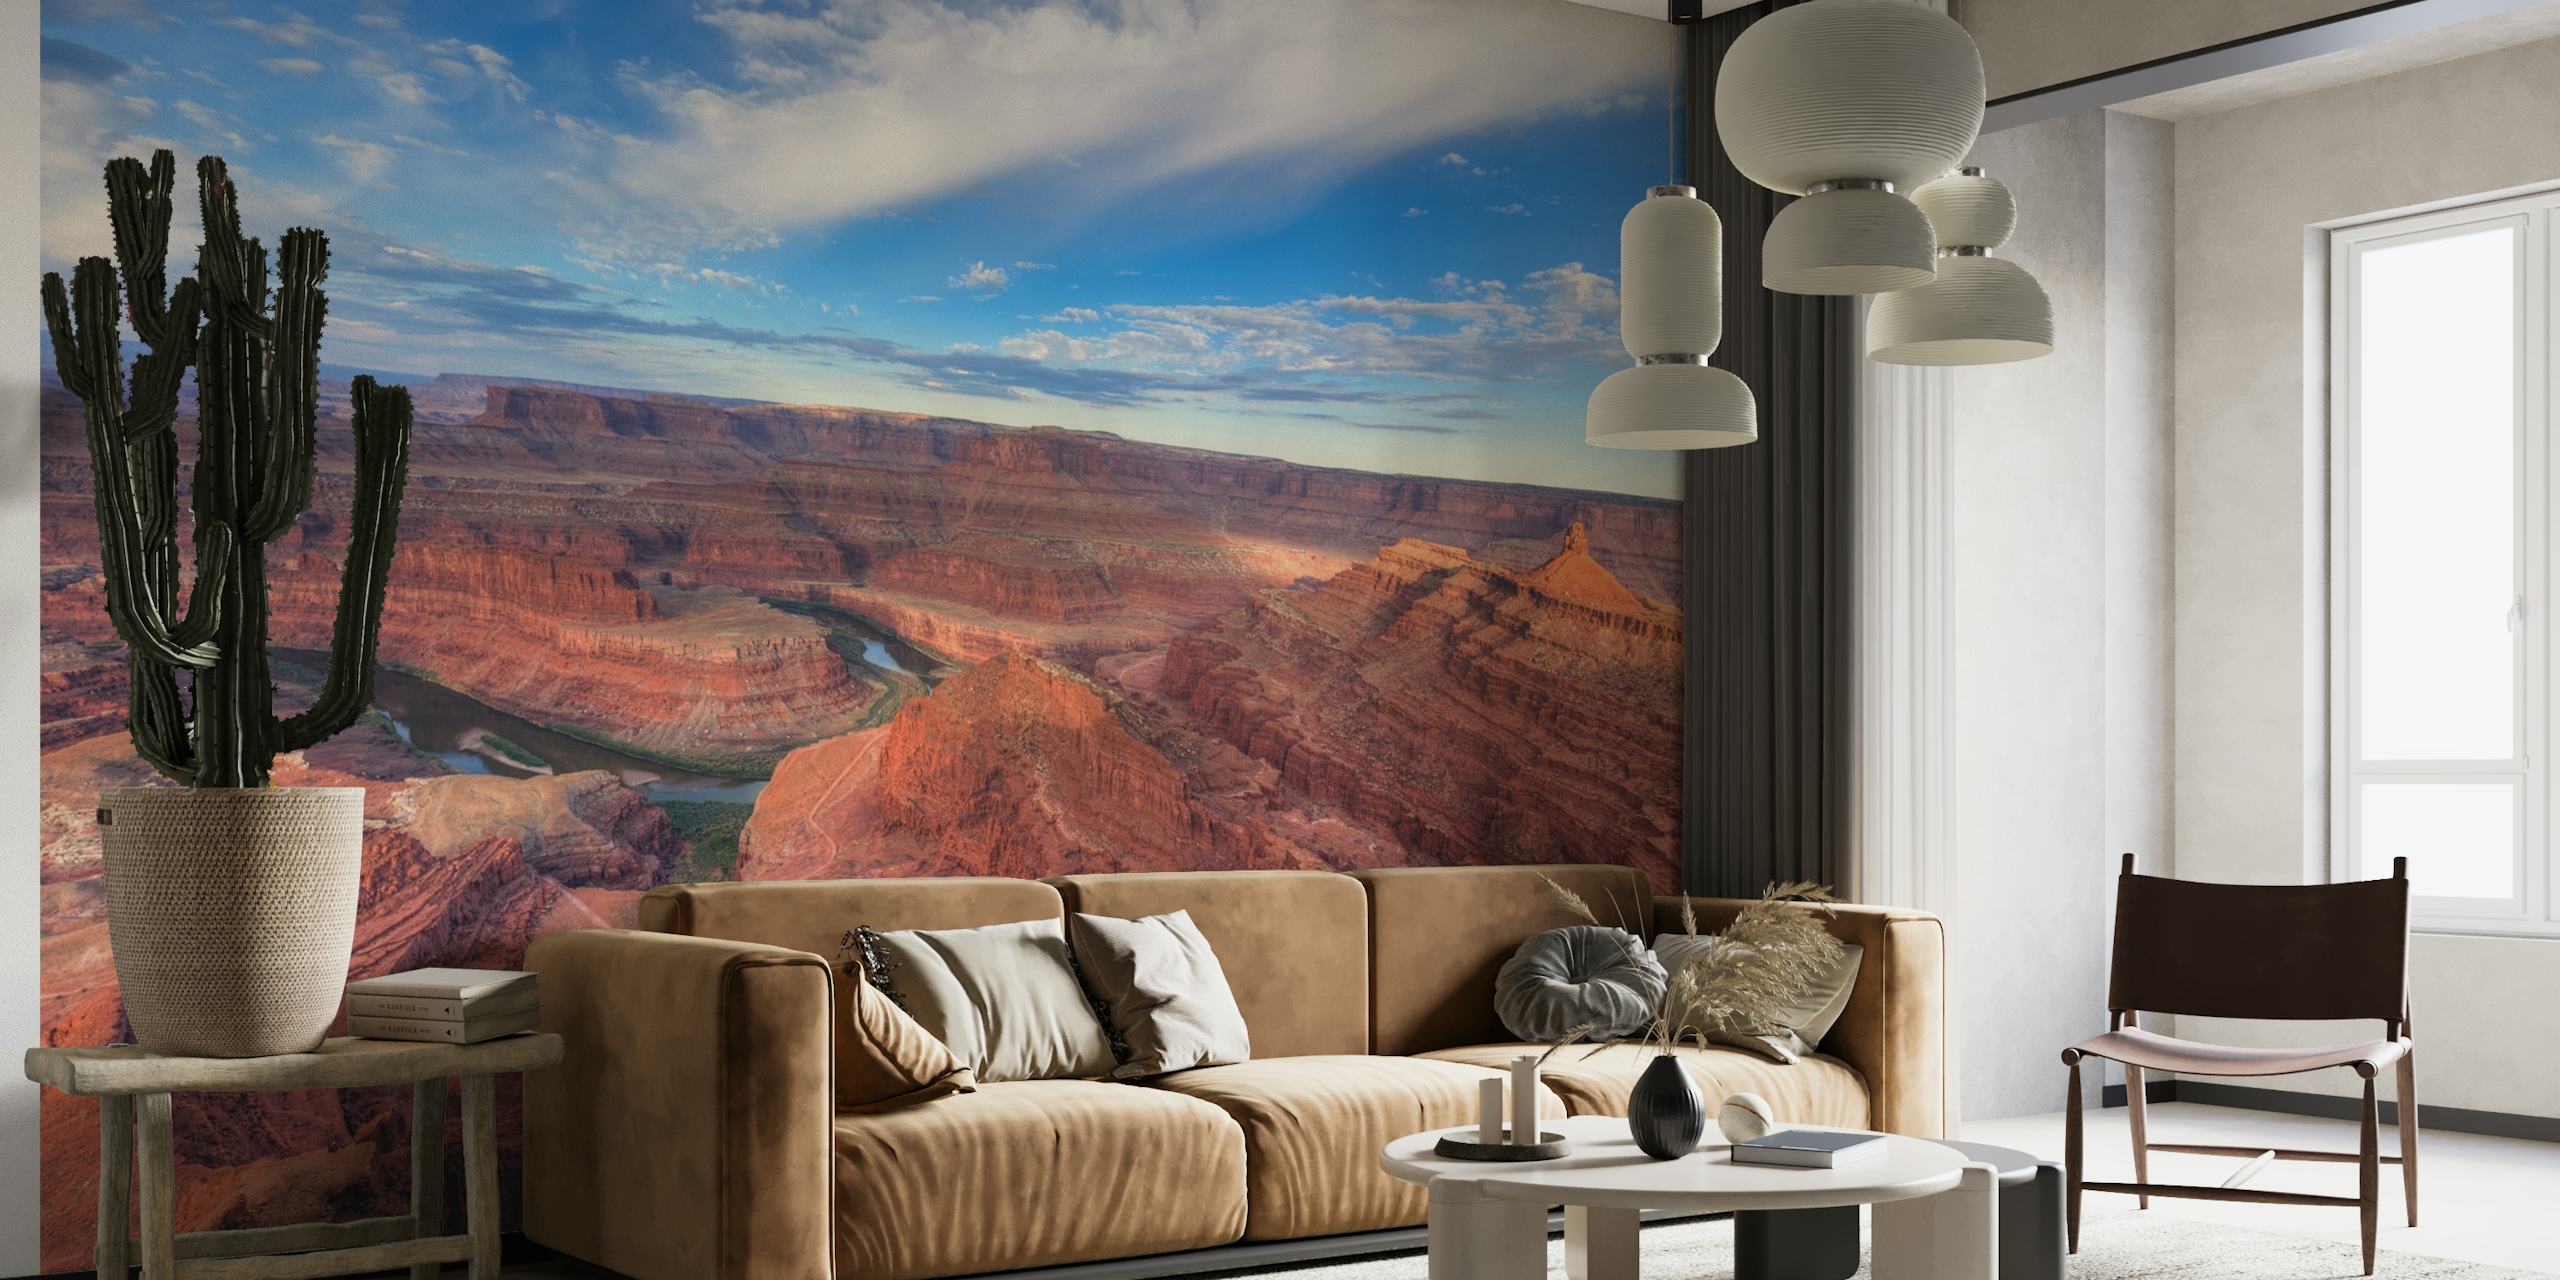 Sunrise over Dead Horse Canyon wall mural with river and red rock formations